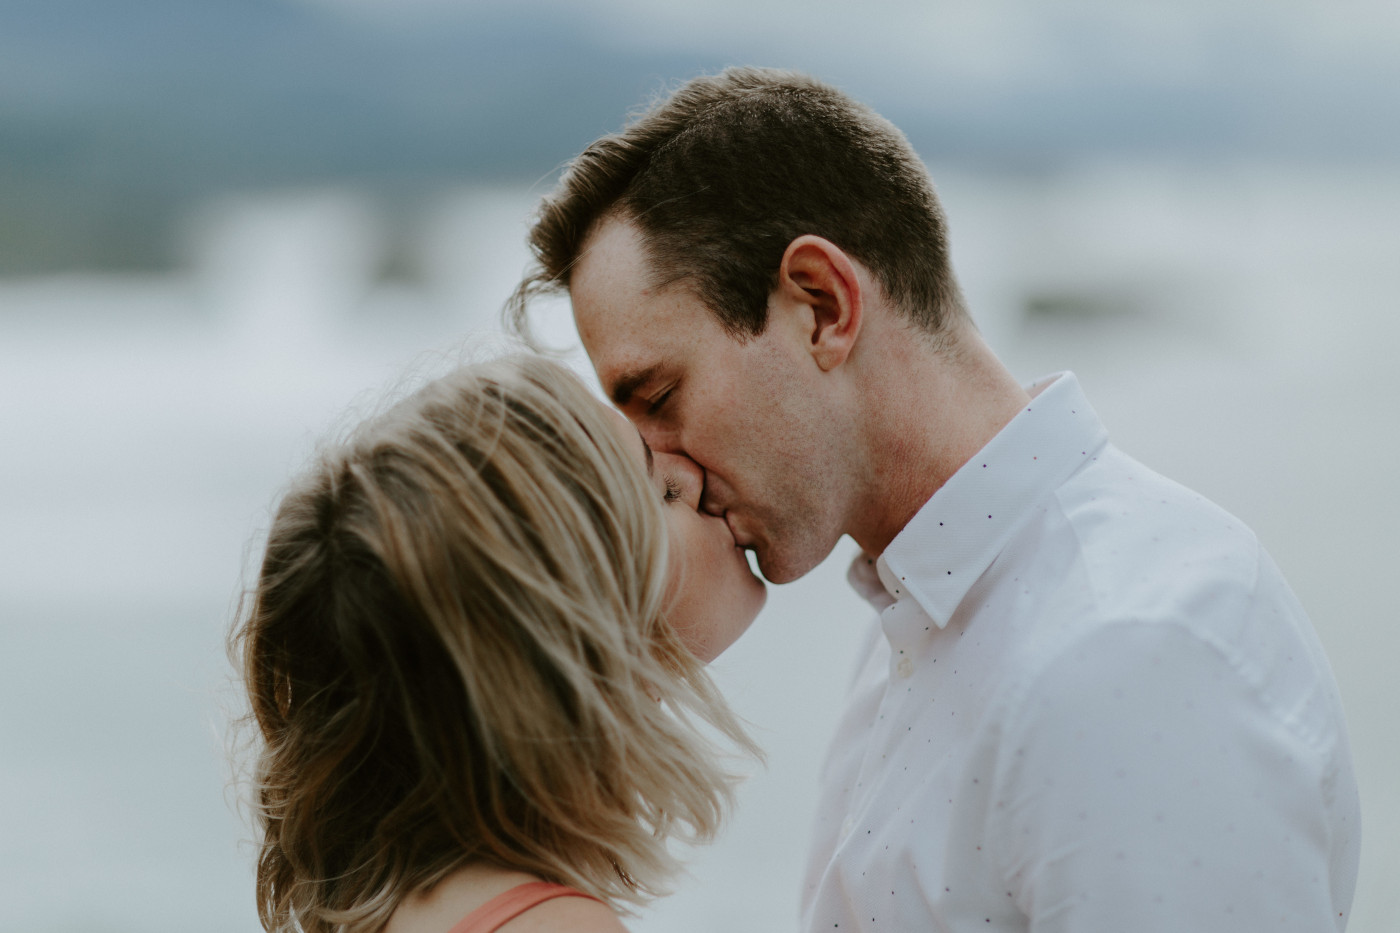 Billy and Chelsey kiss. Elopement wedding photography at Cannon Beach by Sienna Plus Josh.